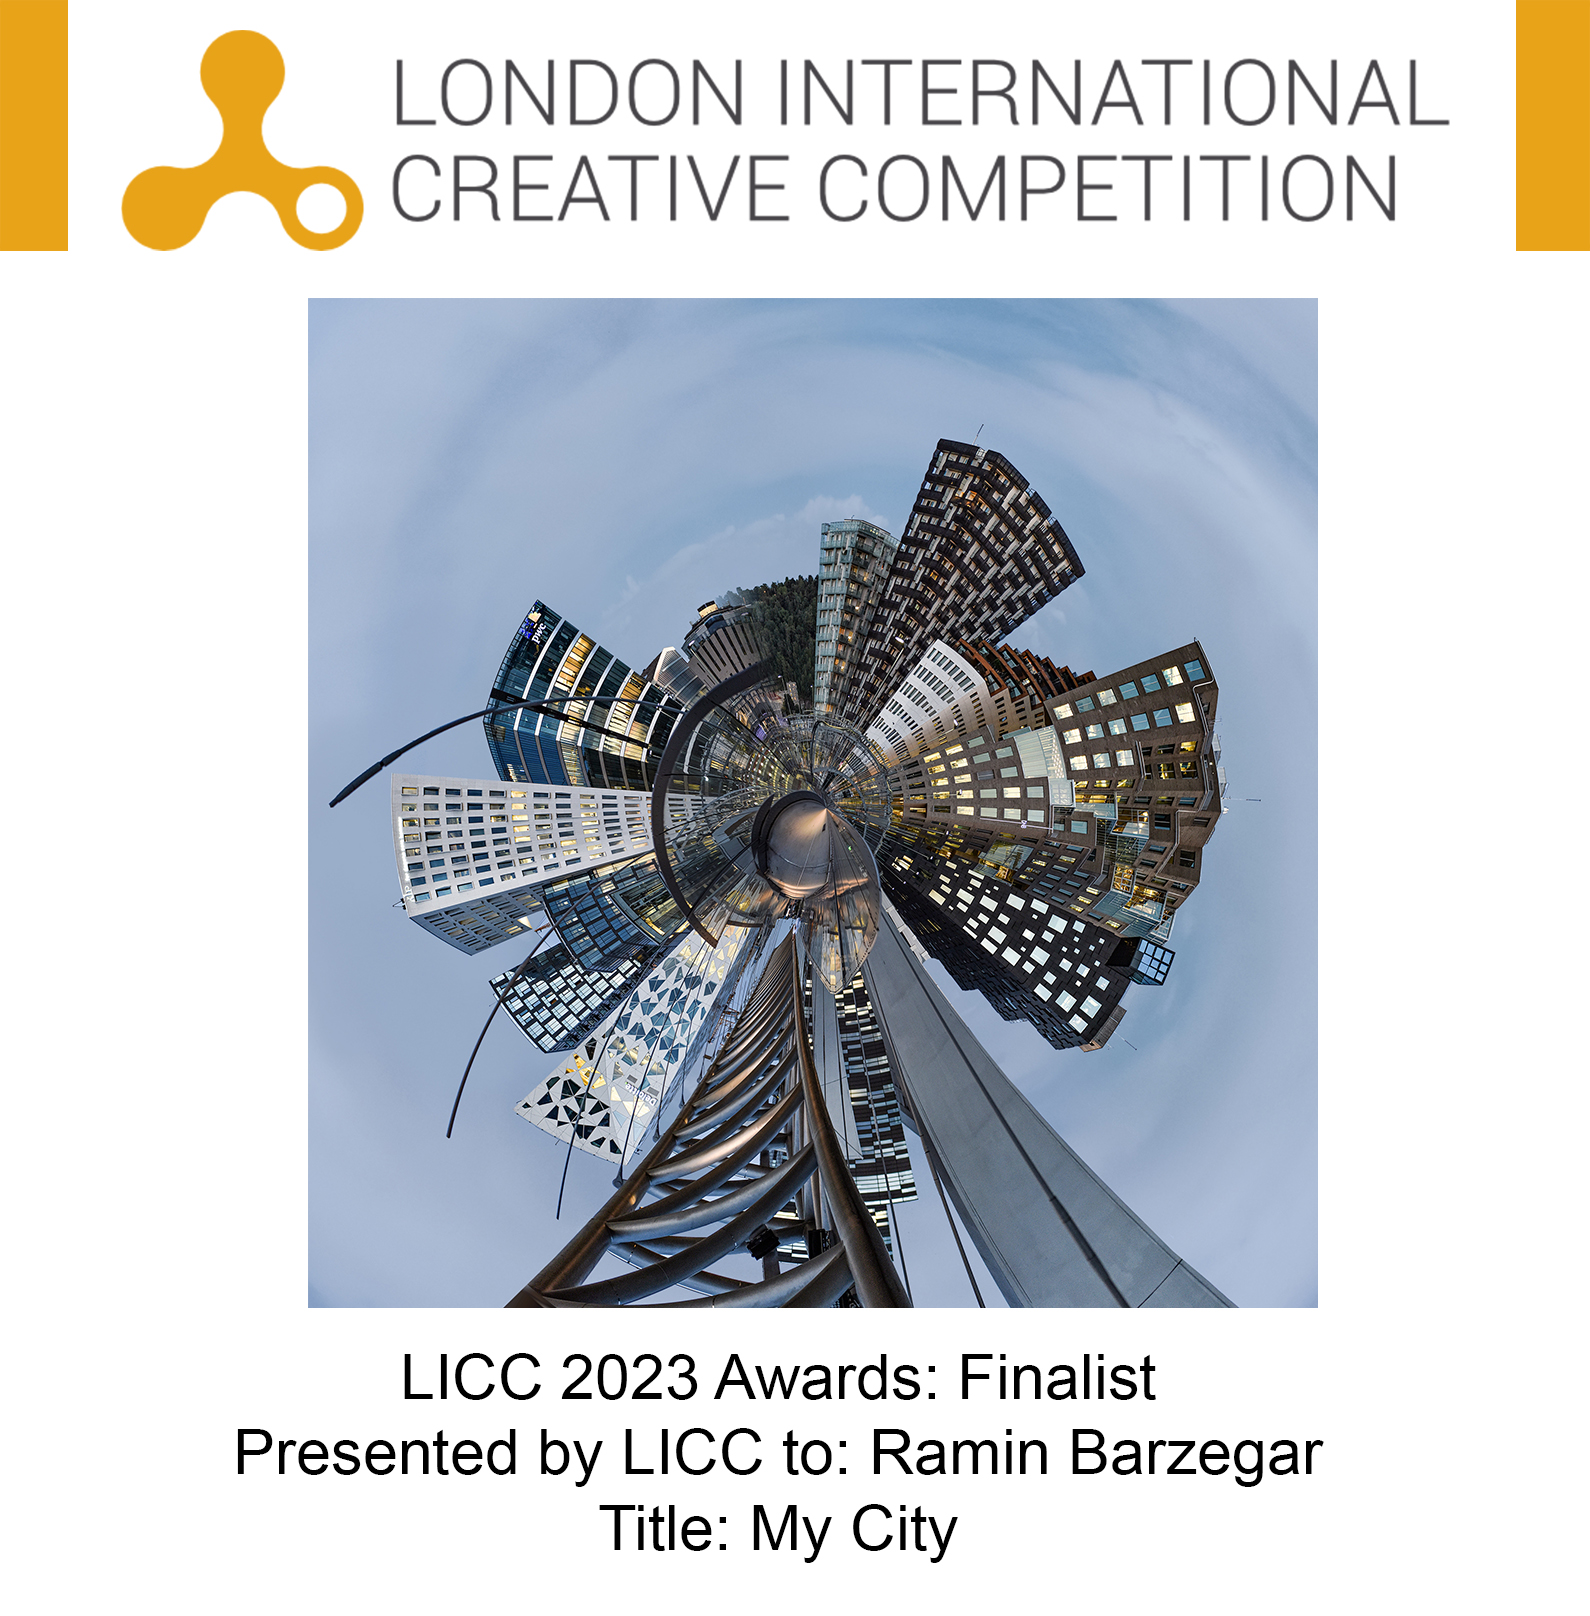 Award:
FINALIST
Presented by LICC to:
Ramin Barzegar
Title of Submission:
My City
Category:
SHOOT (Photo/Video) - Professional